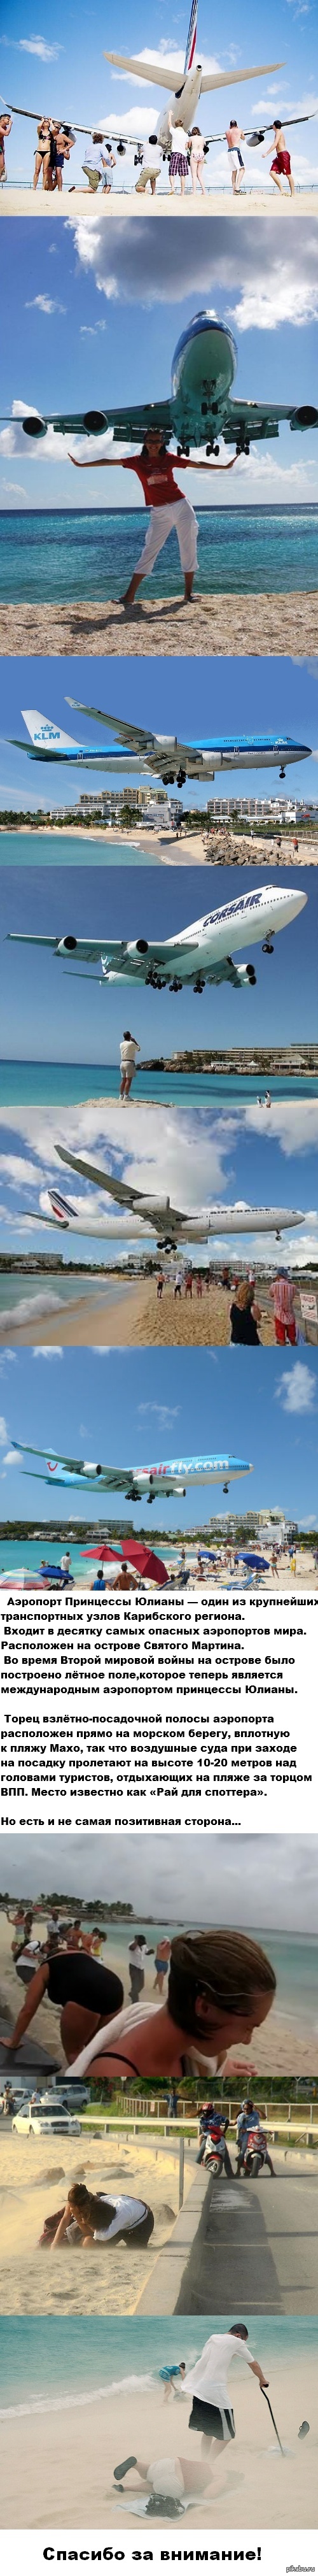 Princess Juliana Airport - The airport, Extreme, Relaxation, Impressions